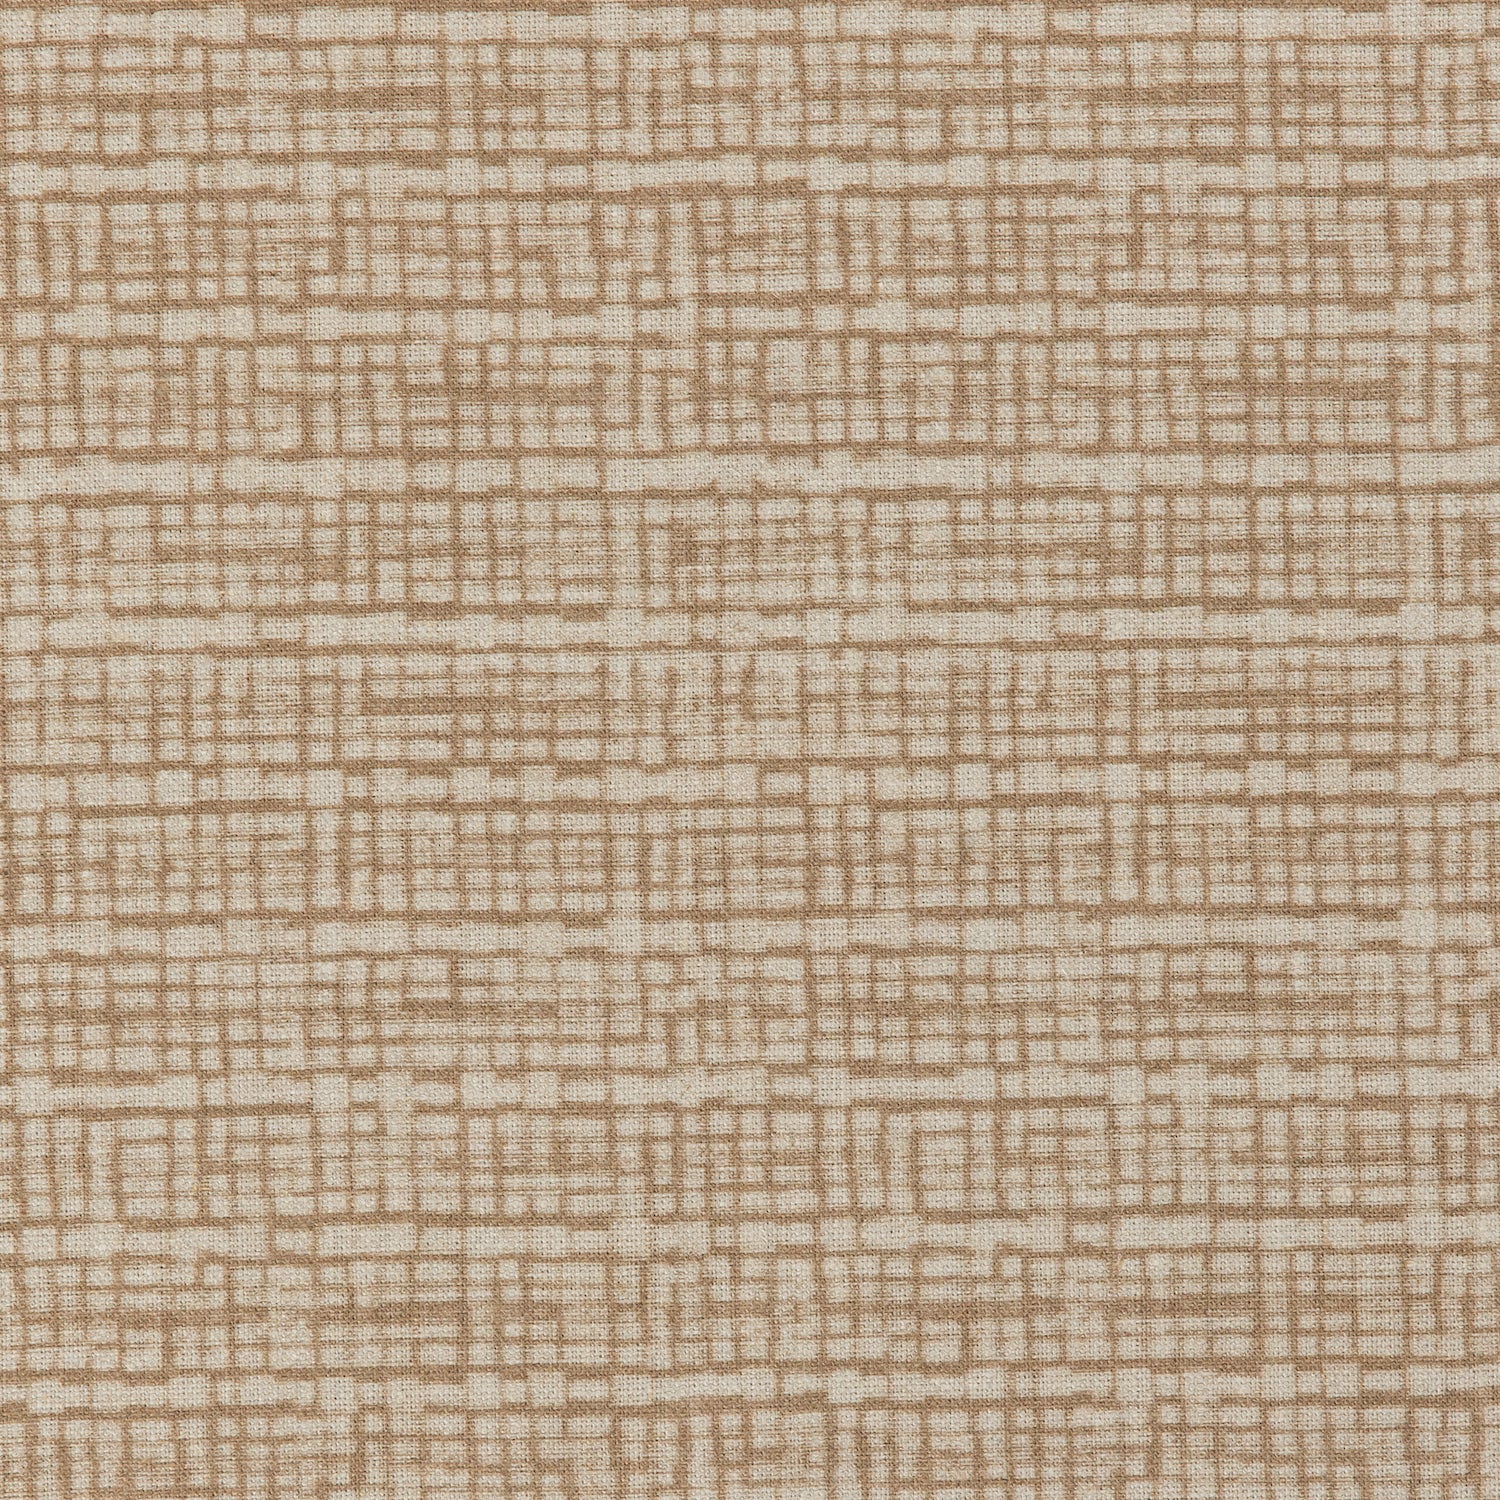 Detail of a linen fabric in a repeating abstract gridded pattern in tan on a cream field.